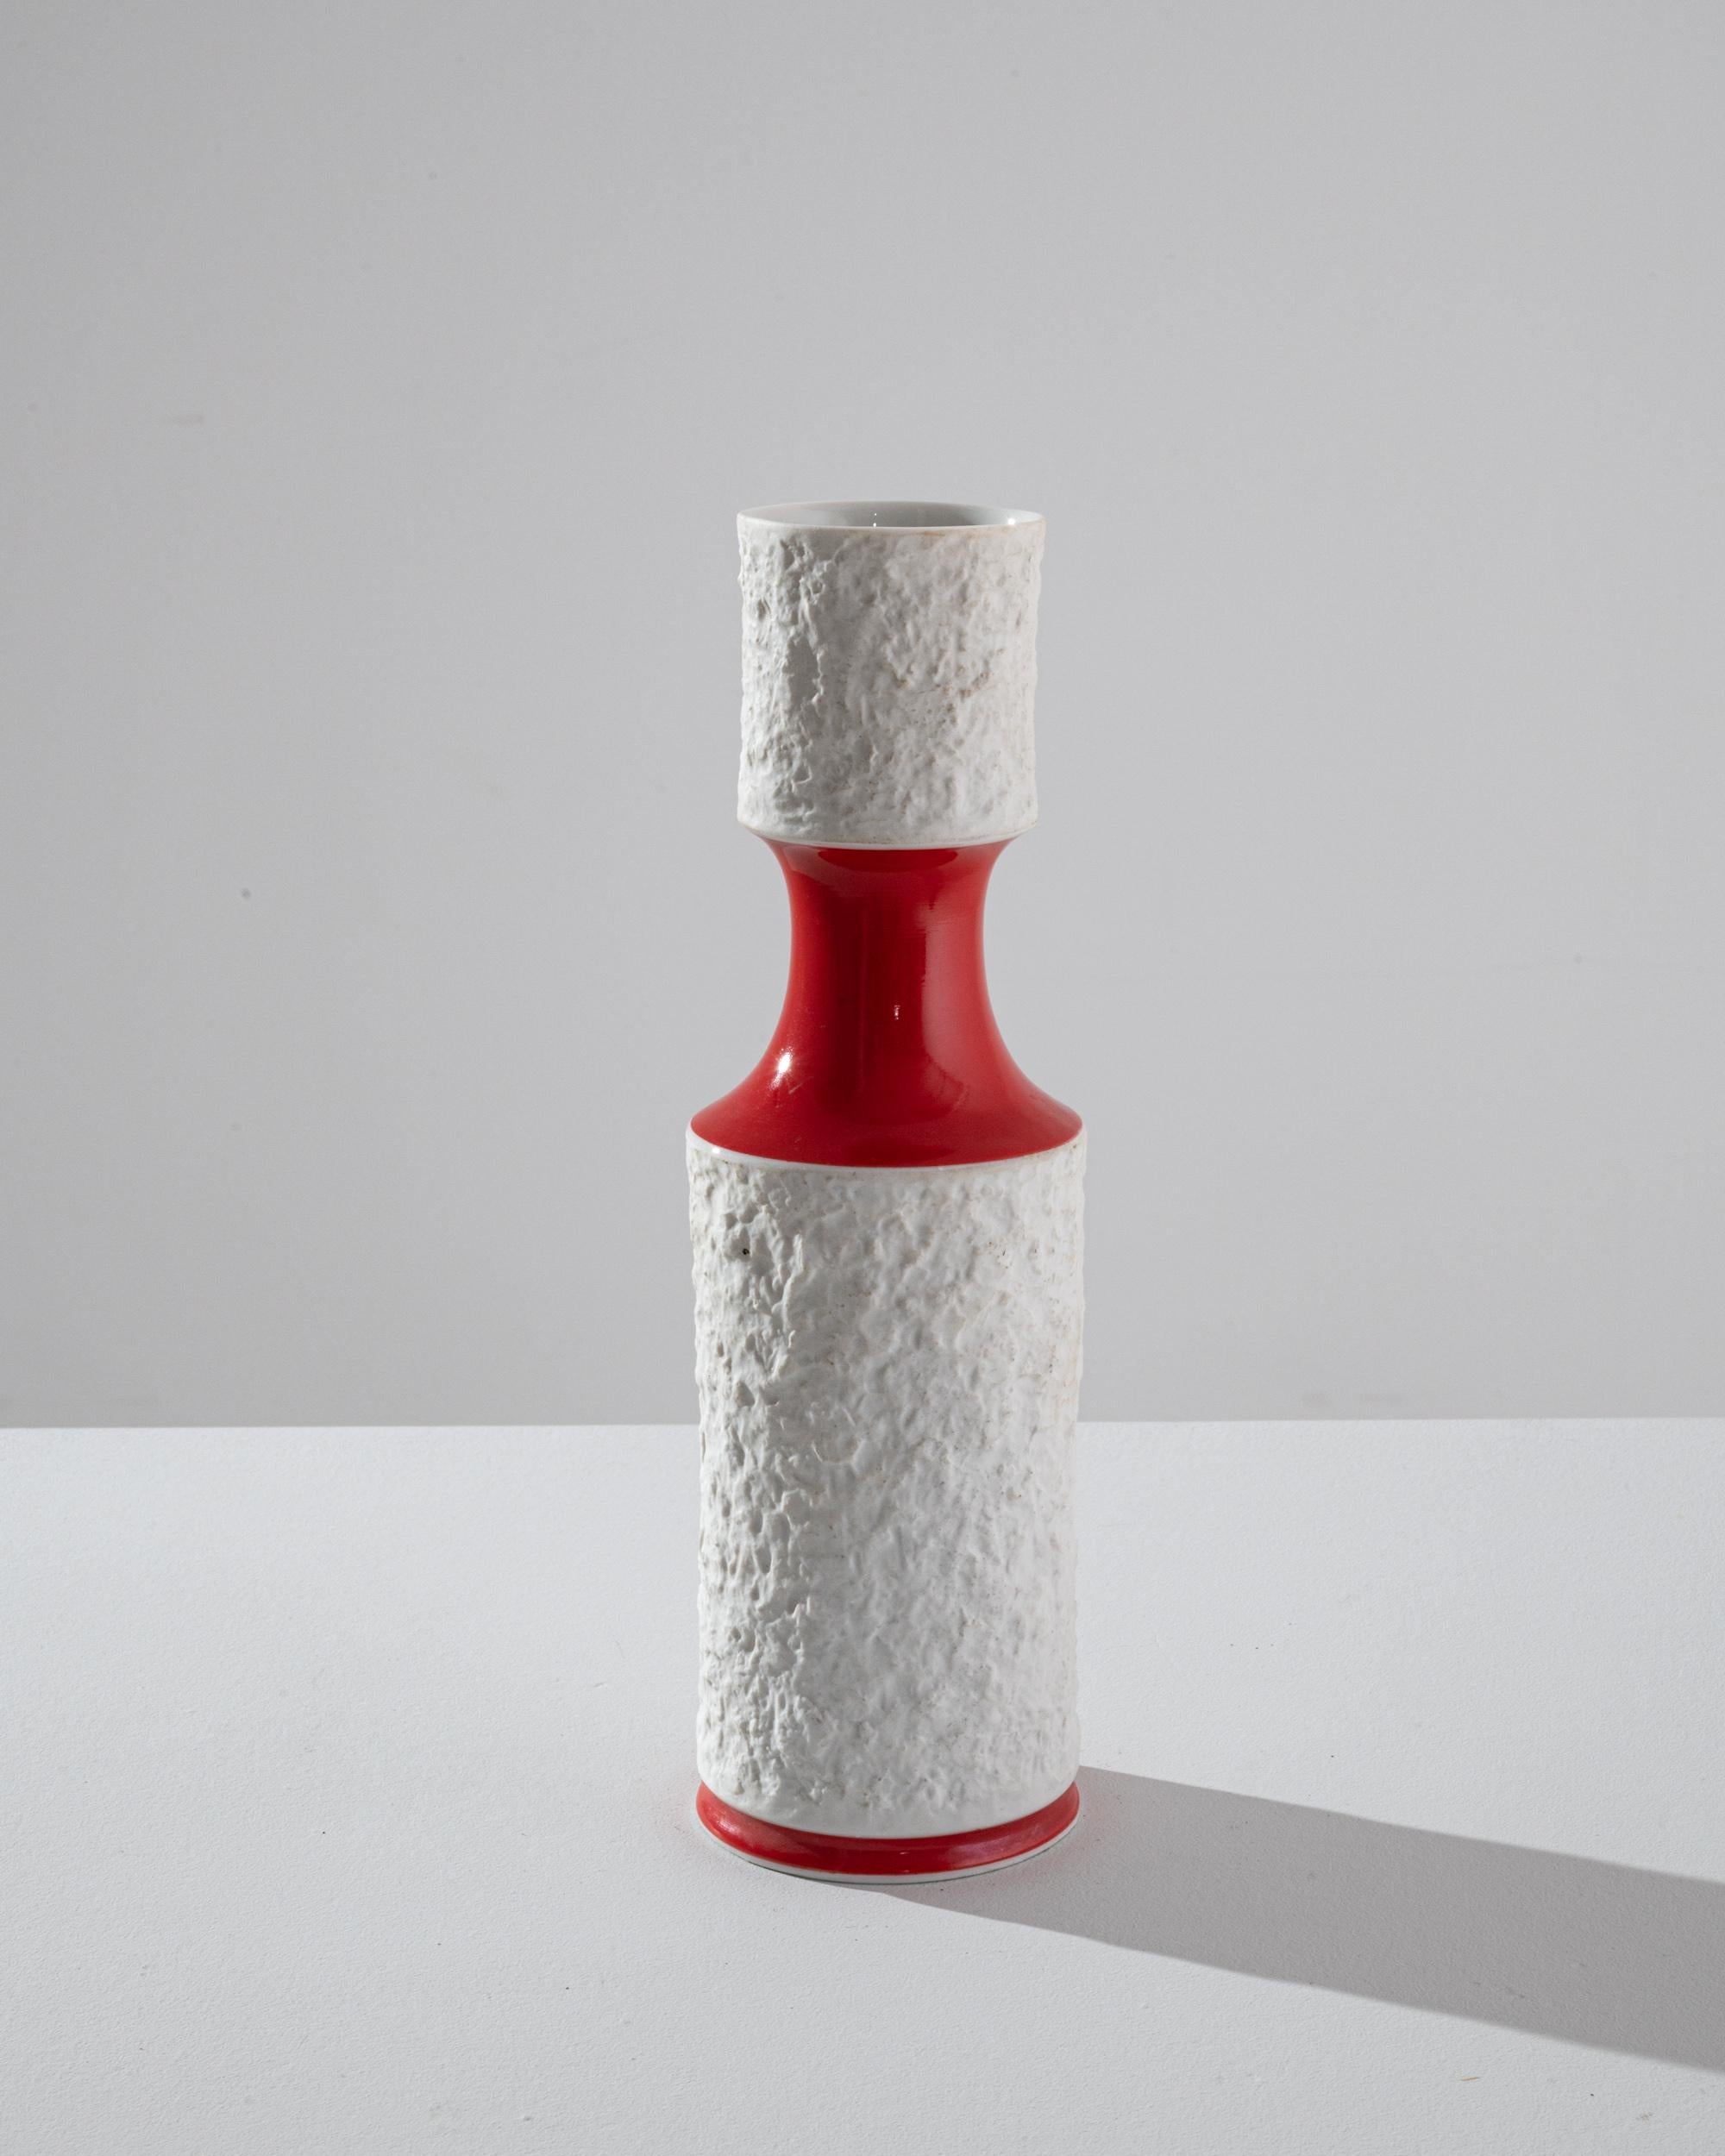 This cylindrical vase was produced in Germany circa 1960, stamped “Royal Porzellan Bavaria.” Encrusted with a tactile white glaze, sharply contrasting with a glossy red. The liquid glaze and organic form capture the fluidity of ceramic material. An